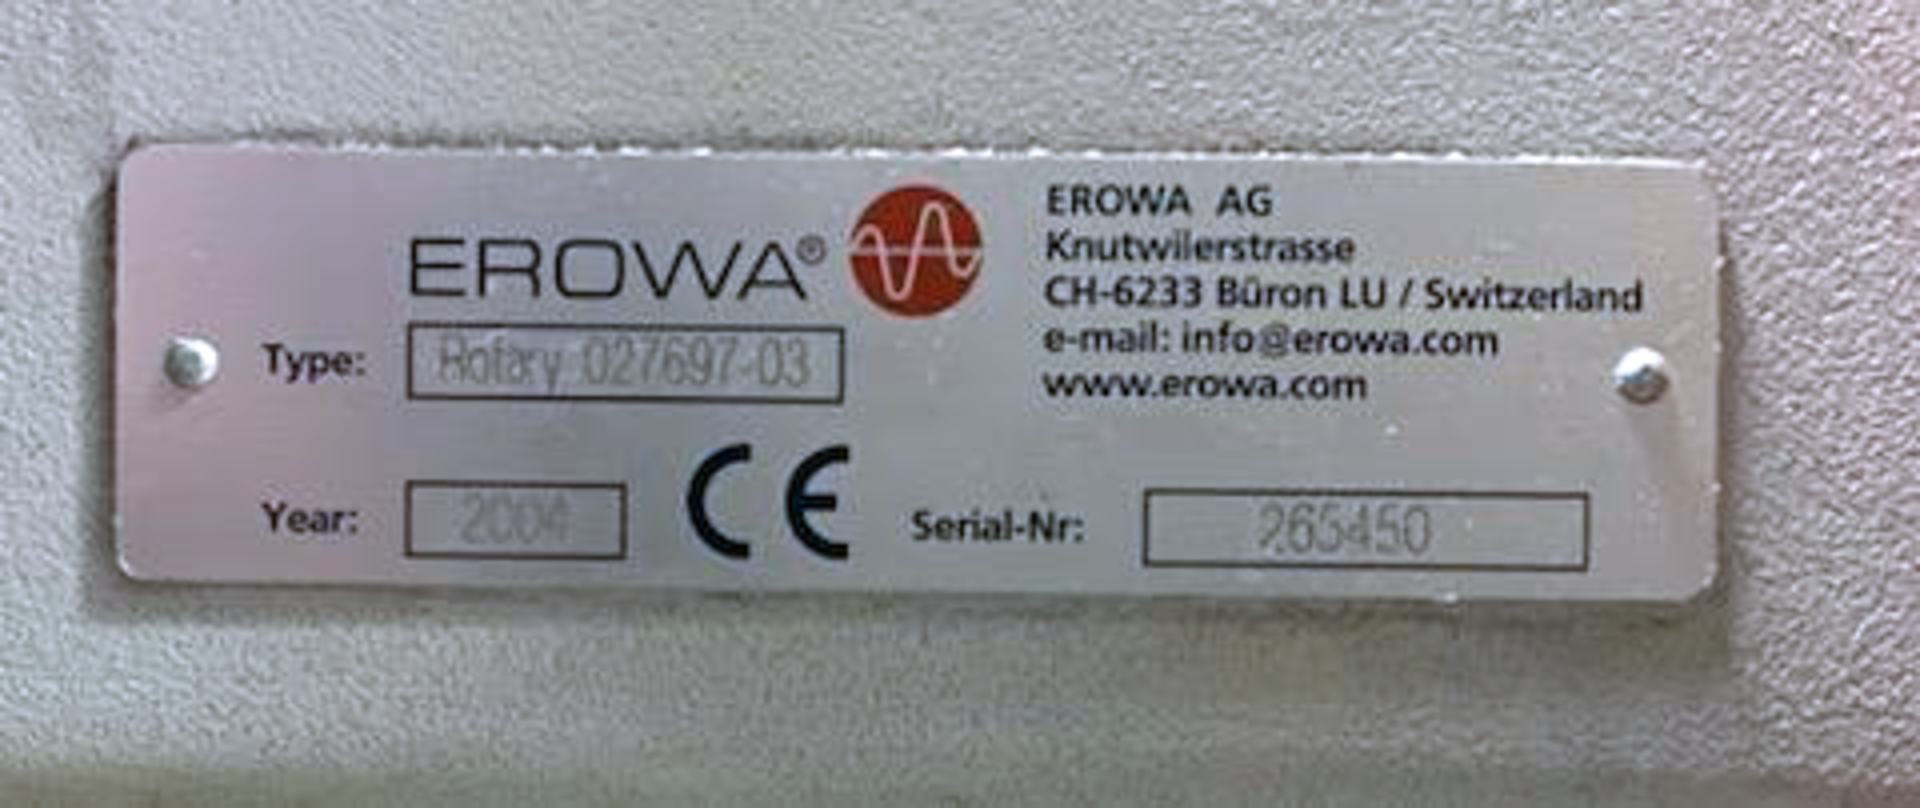 Erowa ERS 90 Electrode Changer / Robot Cell (2004) - Image 5 of 6